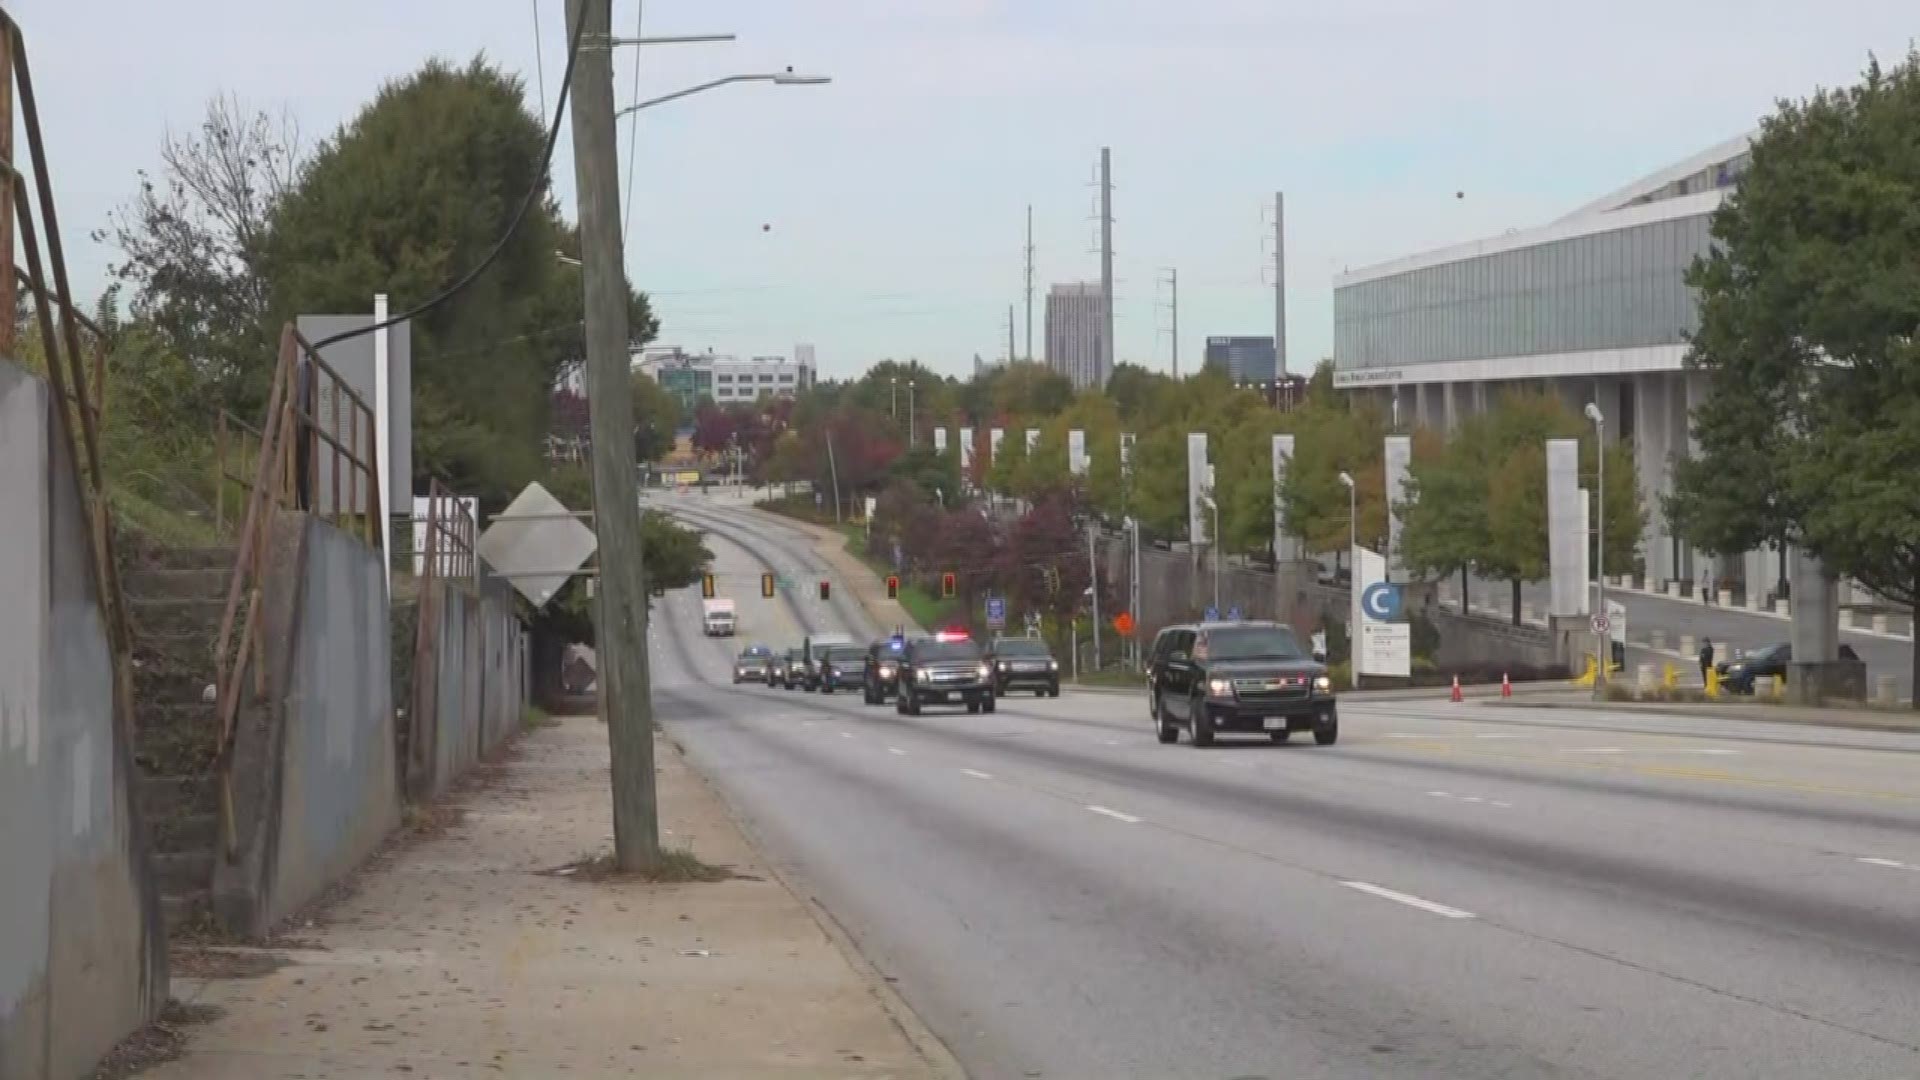 The motorcade was seen along Northside Drive just after 2 p.m. in Atlanta.